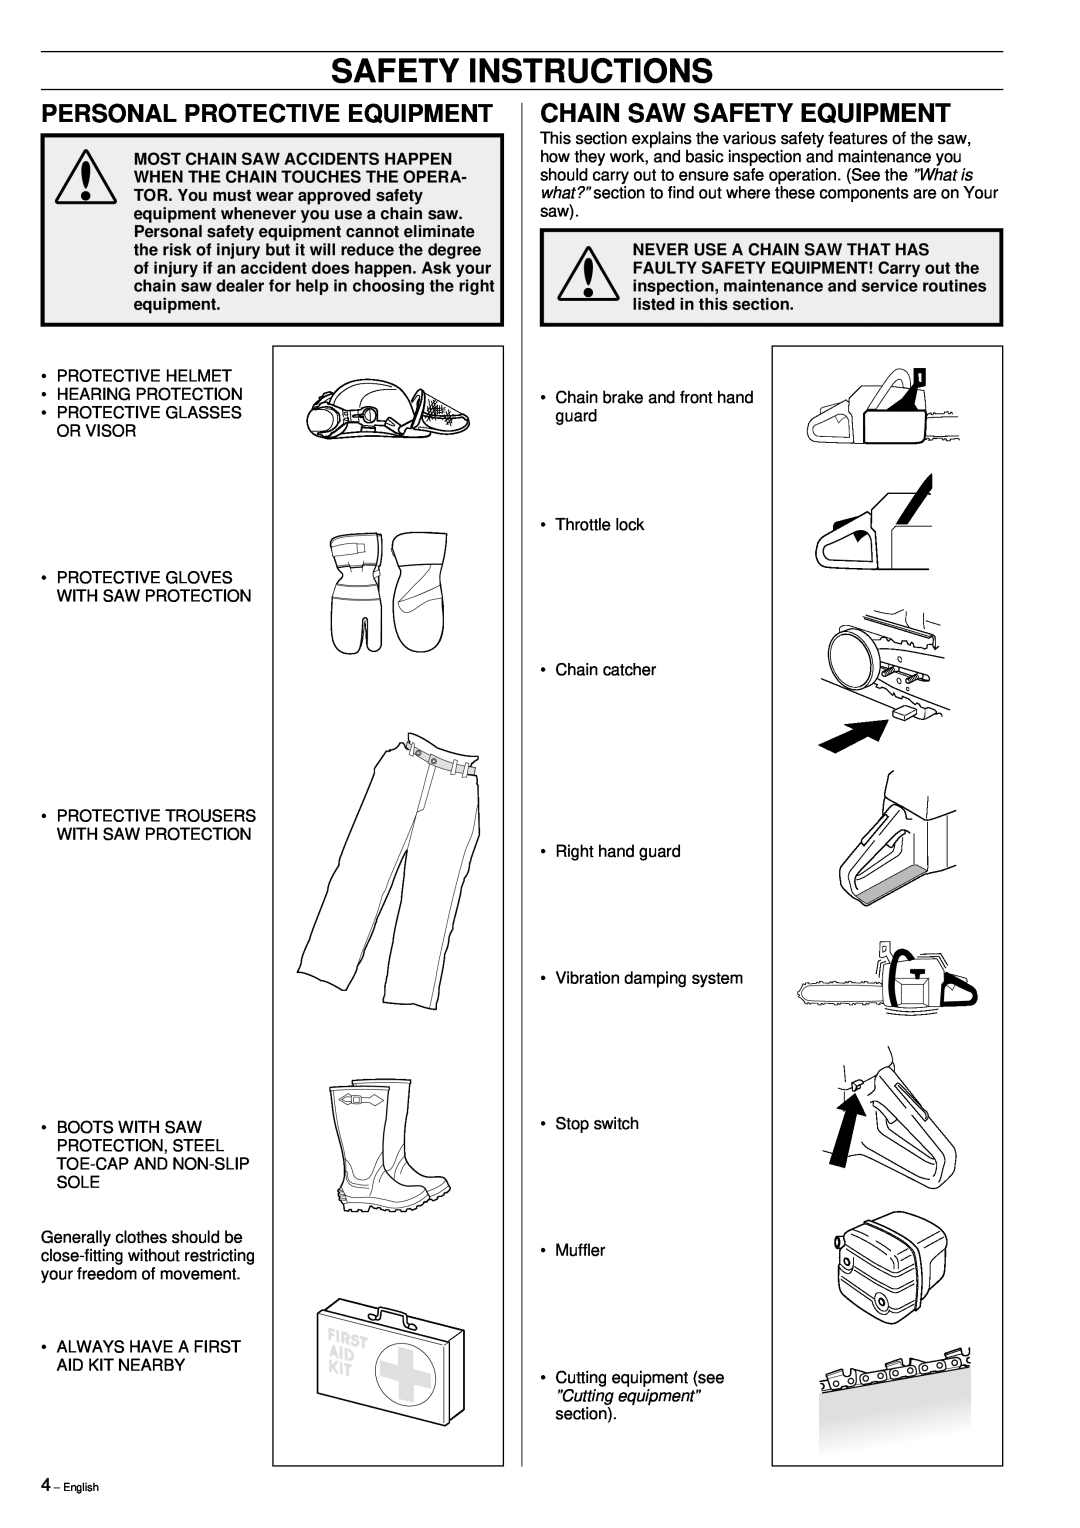 Jonsered 2159 manual Safety Instructions, Chain Saw Safety Equipment, Personal Protective Equipment 